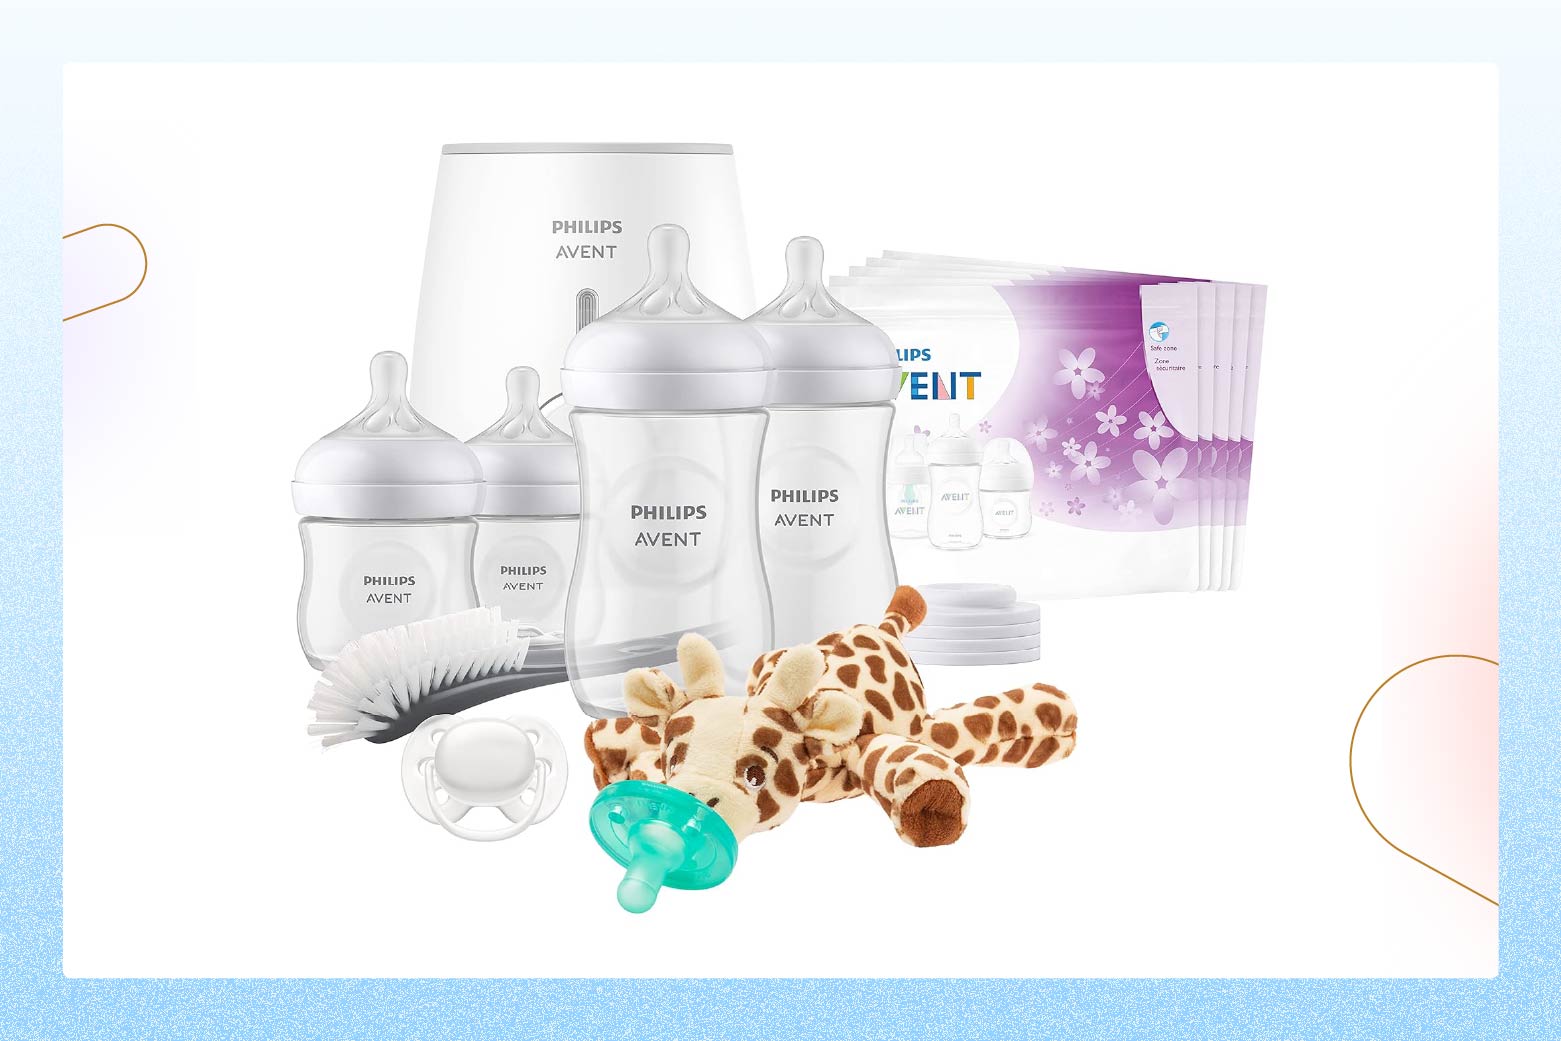 Product photo of Philips Avent Baby Bottle Gift Set with four baby bottles, bottle warmer, bottle brush, giraffe plush toy and other accessories